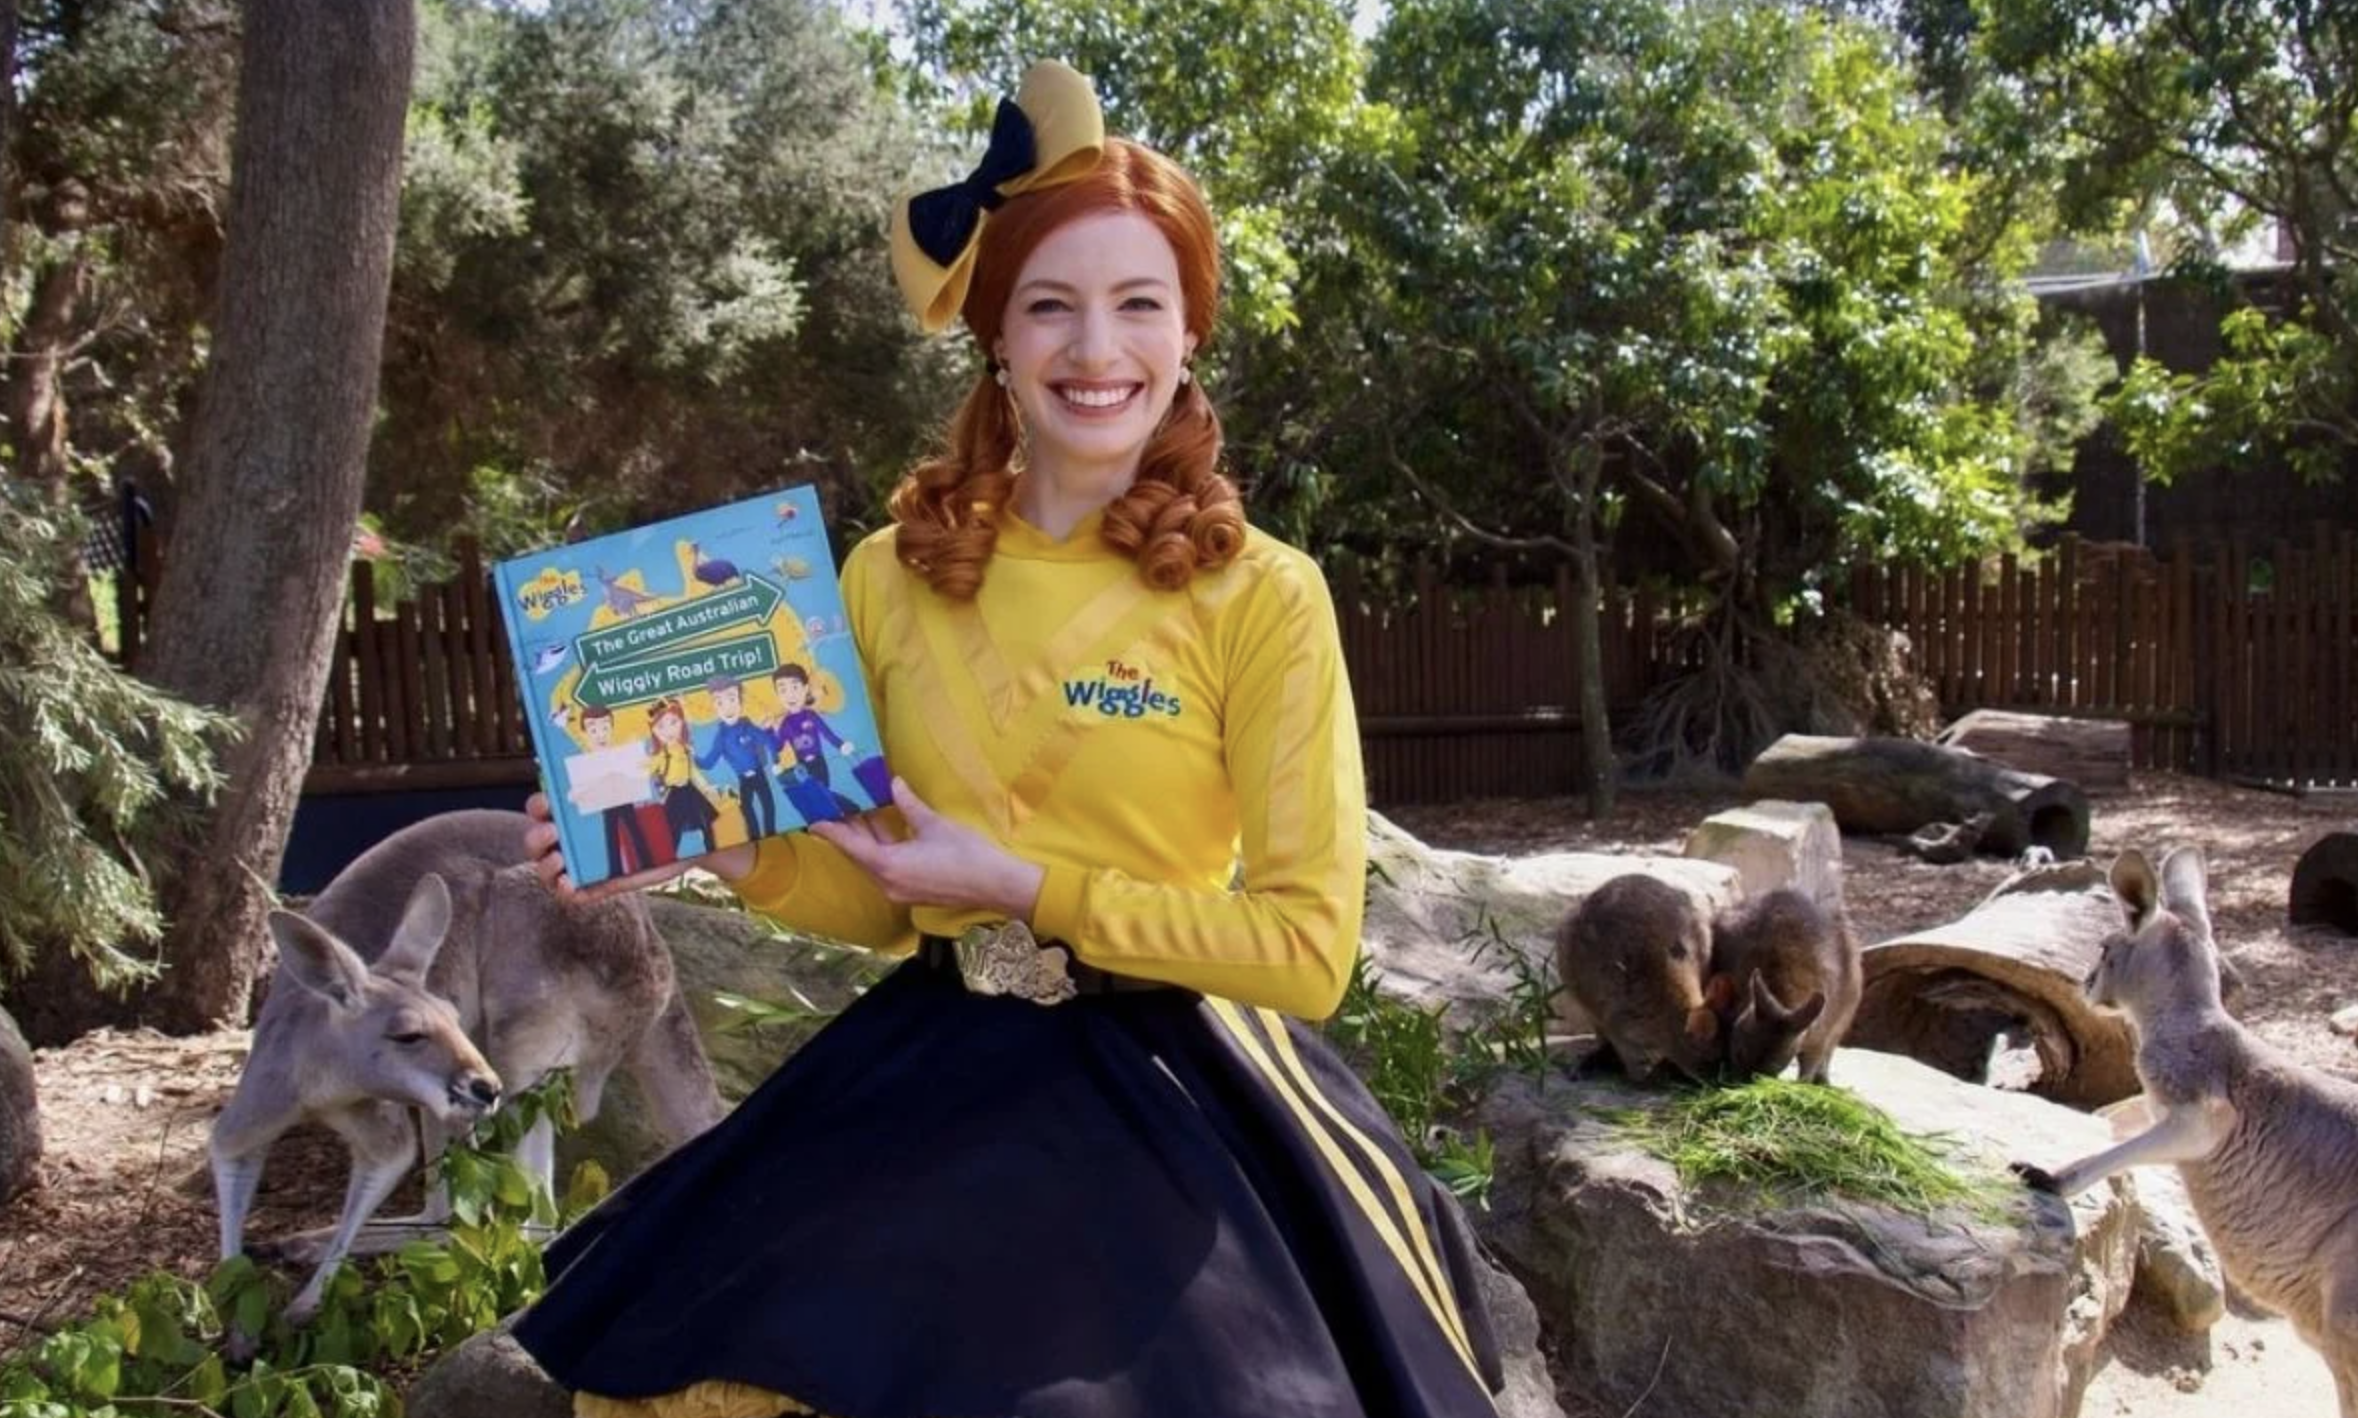 The Wiggles join Tourism Australia’s Holiday Here This Year campaign